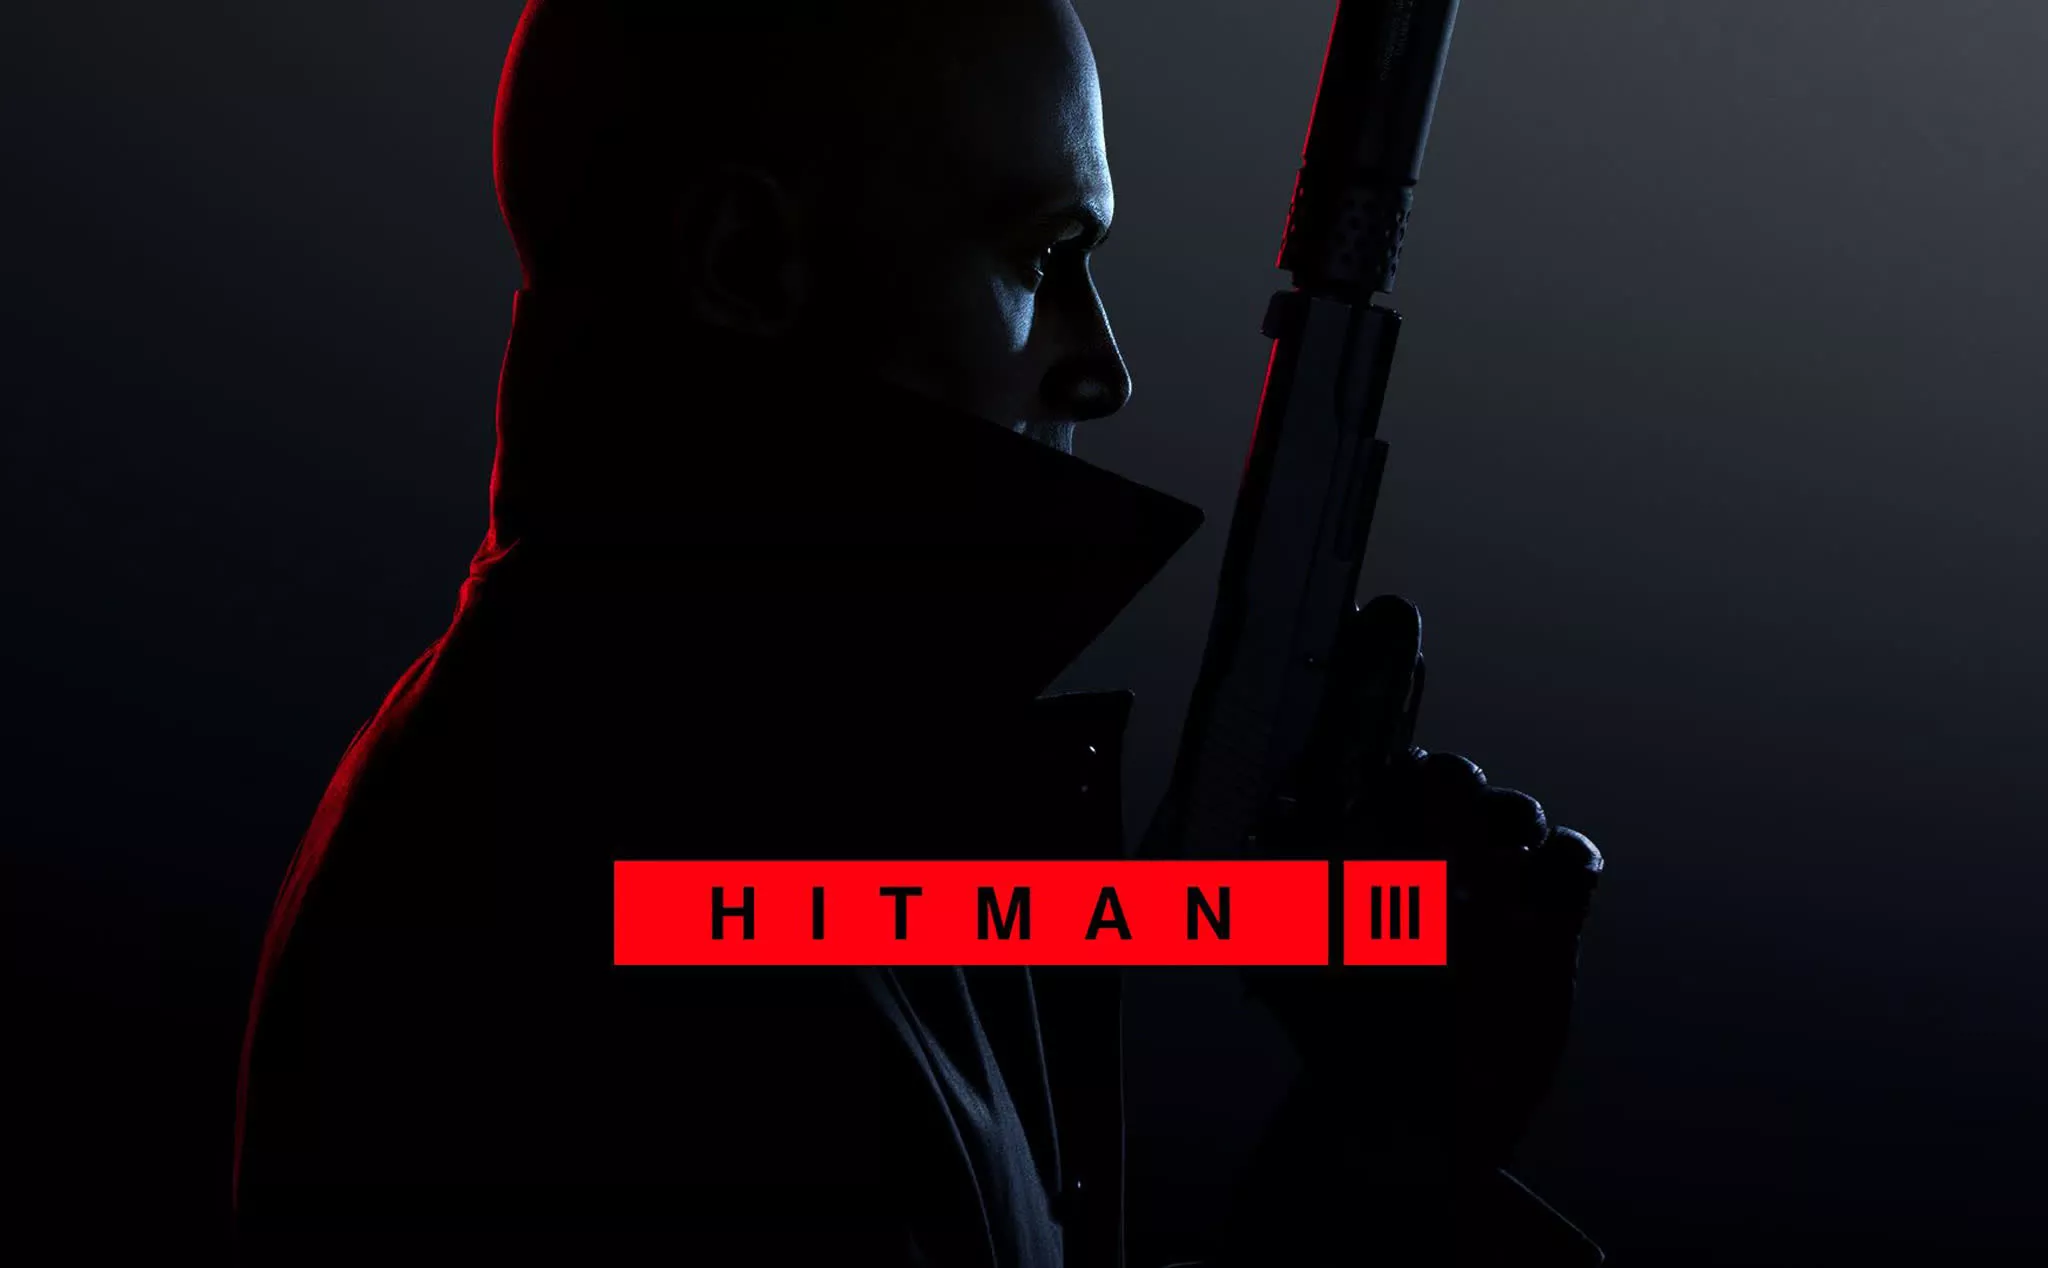 Hitman 3 developer Io Interactive apologizes for expensive Steam launch with free upgrades